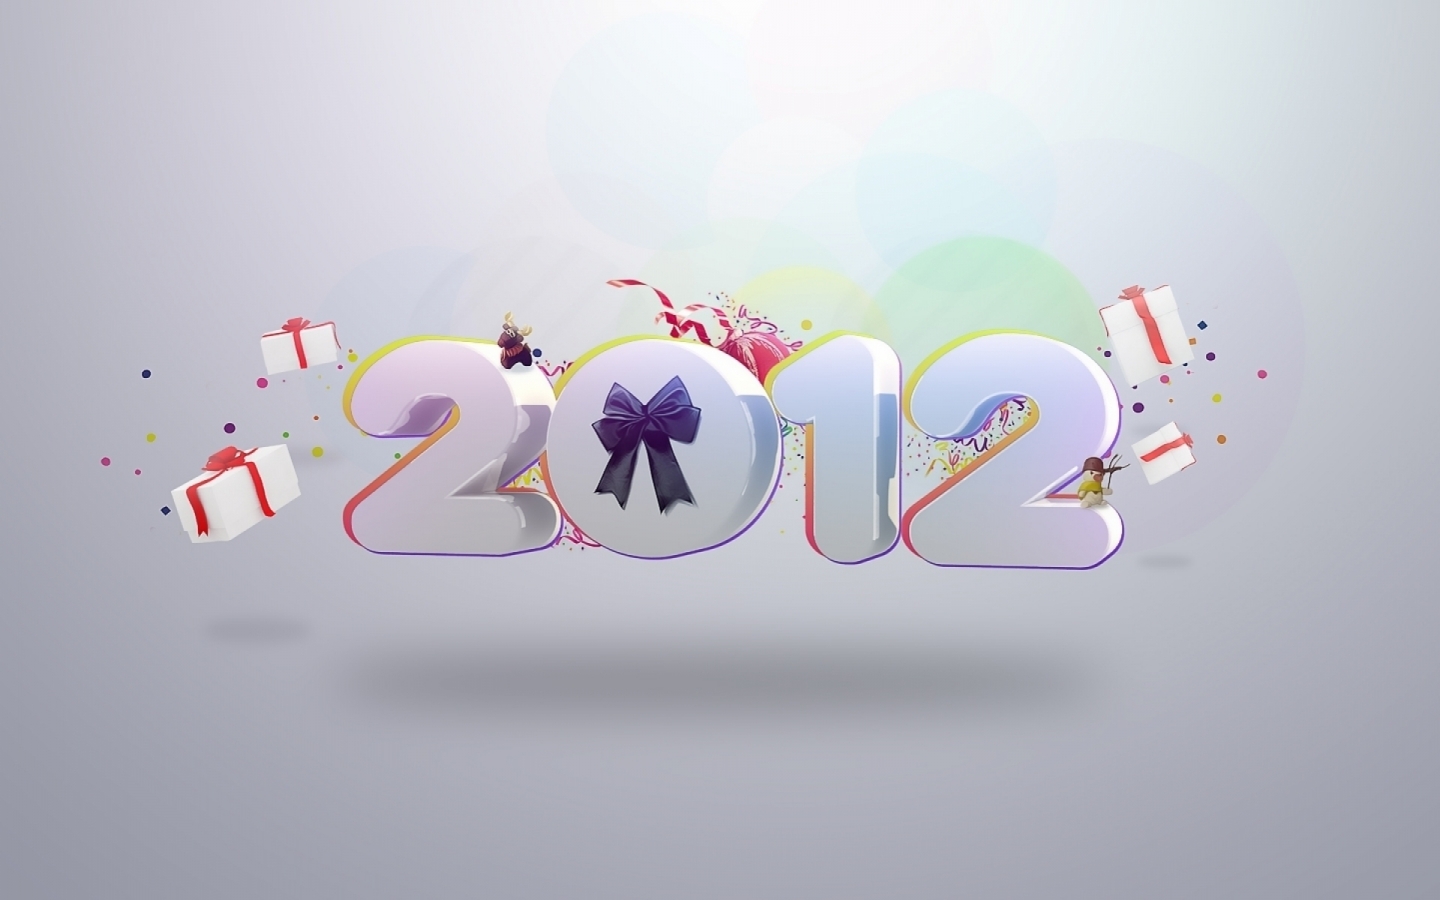 2012 Year Celebration for 1440 x 900 widescreen resolution